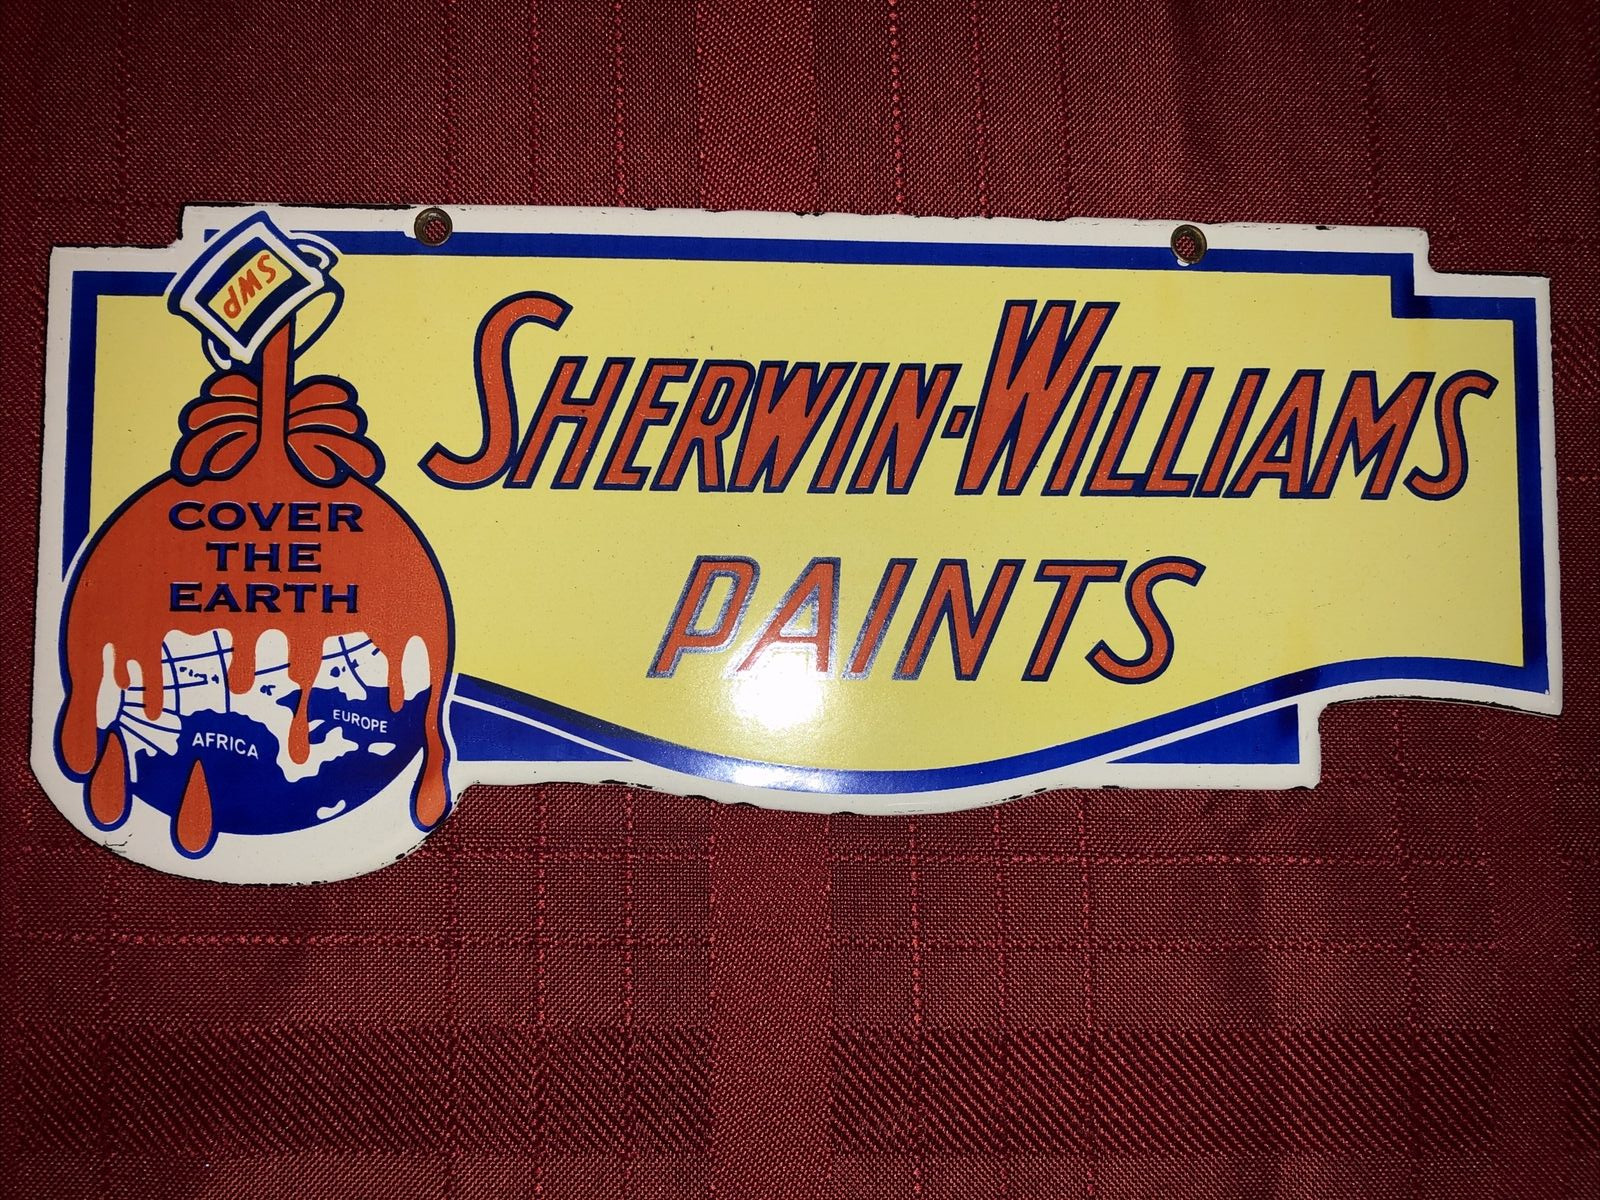 Sherwin Williams Paints Hardware Store Gas Oil Porcelain Sign